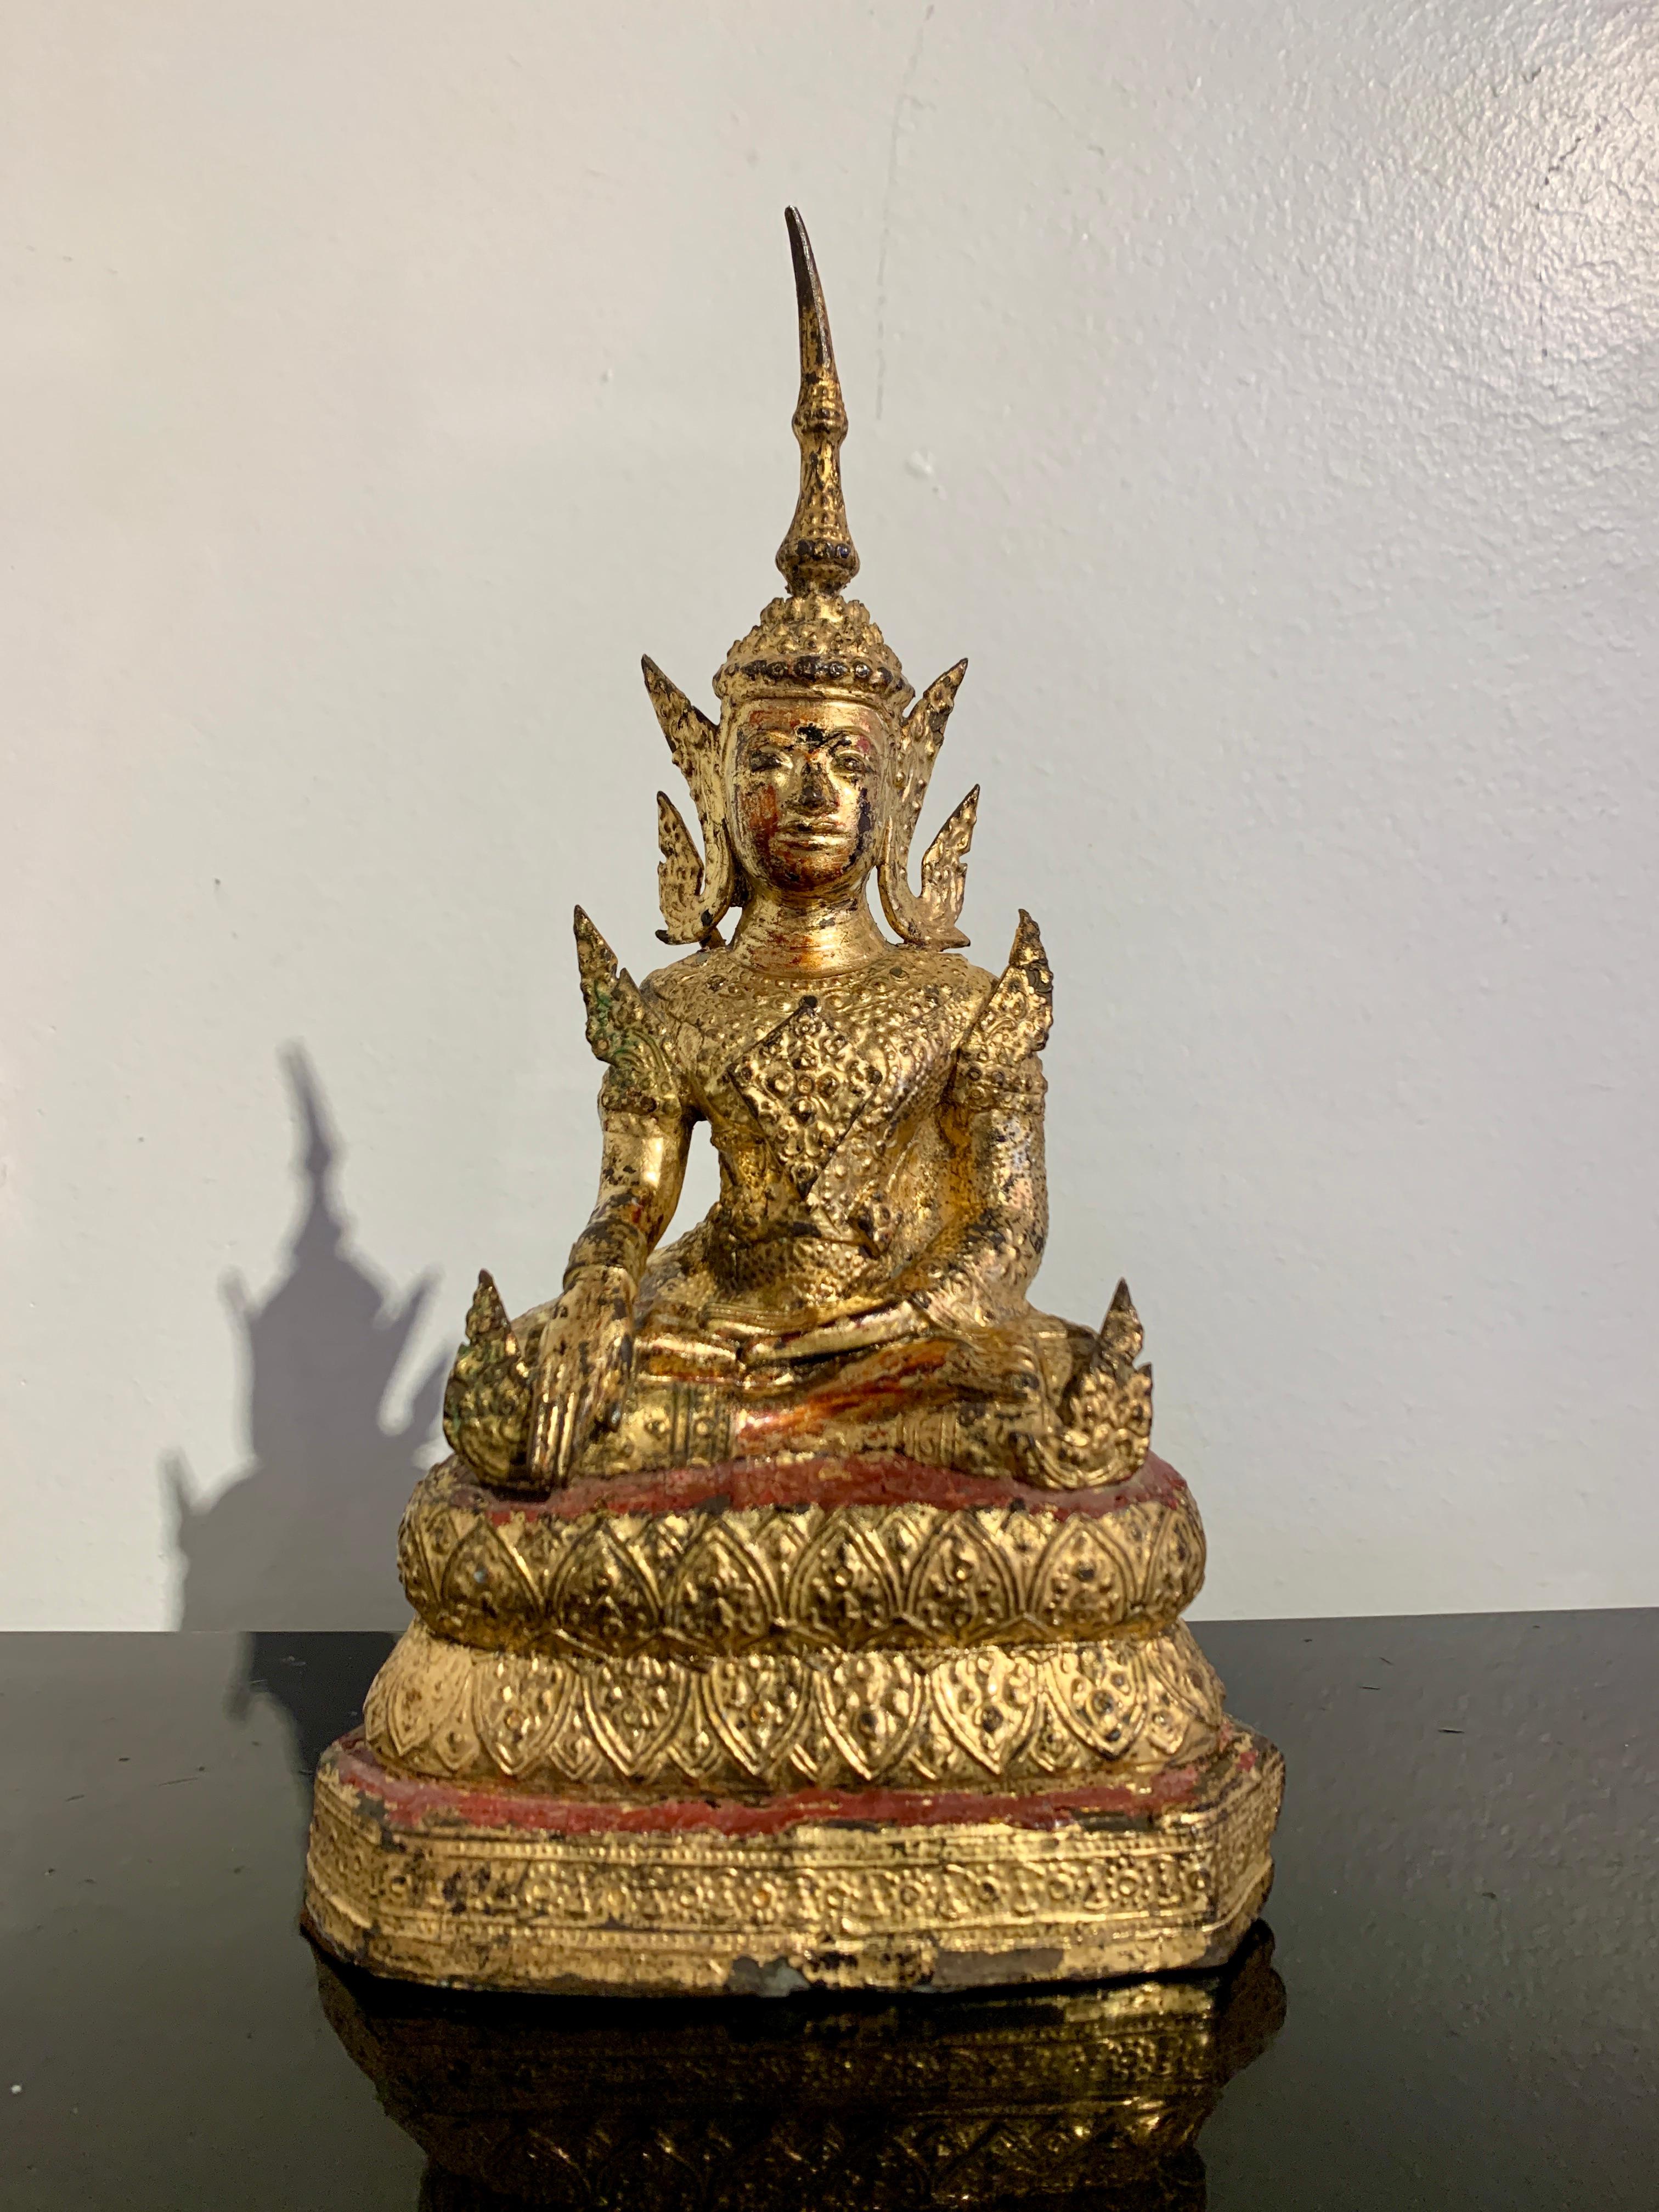 A wonderful Thai Rattanakosin Period lacquered and gilt cast bronze figure of the Buddha in royal attire, mid 19th century, Thailand.

The lovely figure depicts the Buddha in bhumisparsha mudra, the gesture of calling the earth to witness. Seated